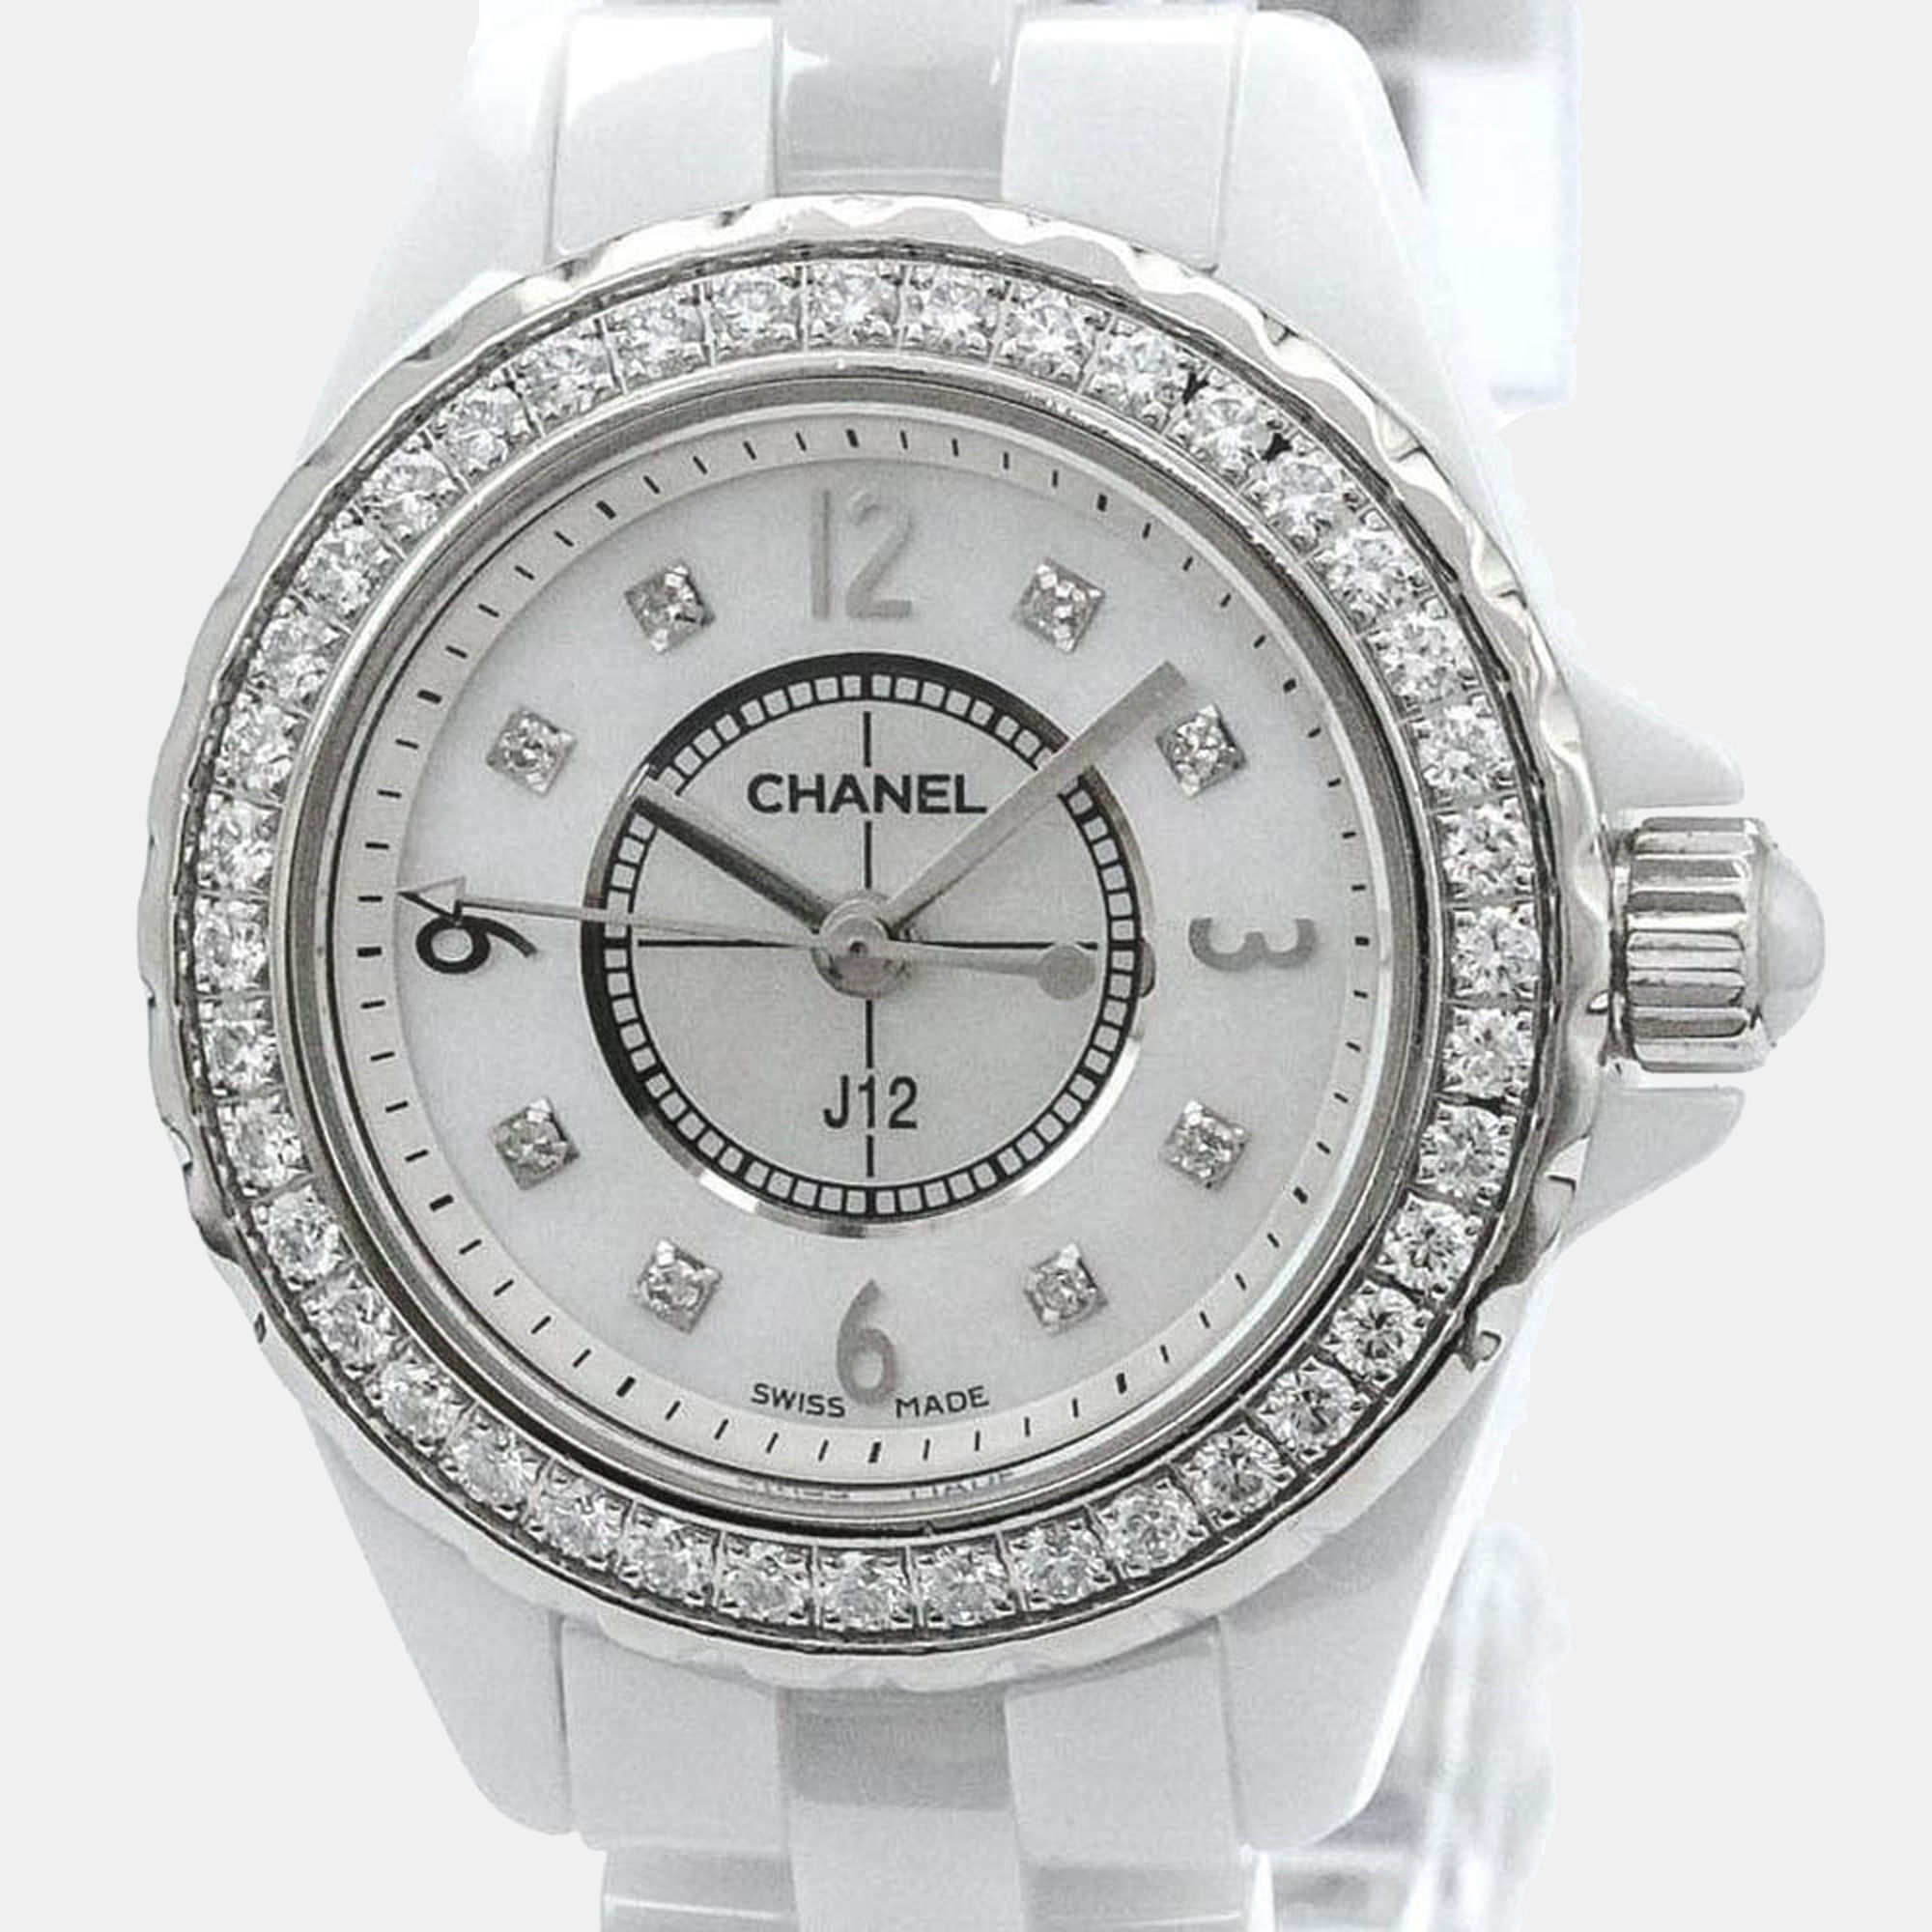 Chanel White Diamonds Stainless Steel And Ceramic J12 H3110 Women's Wristwatch 33 Mm